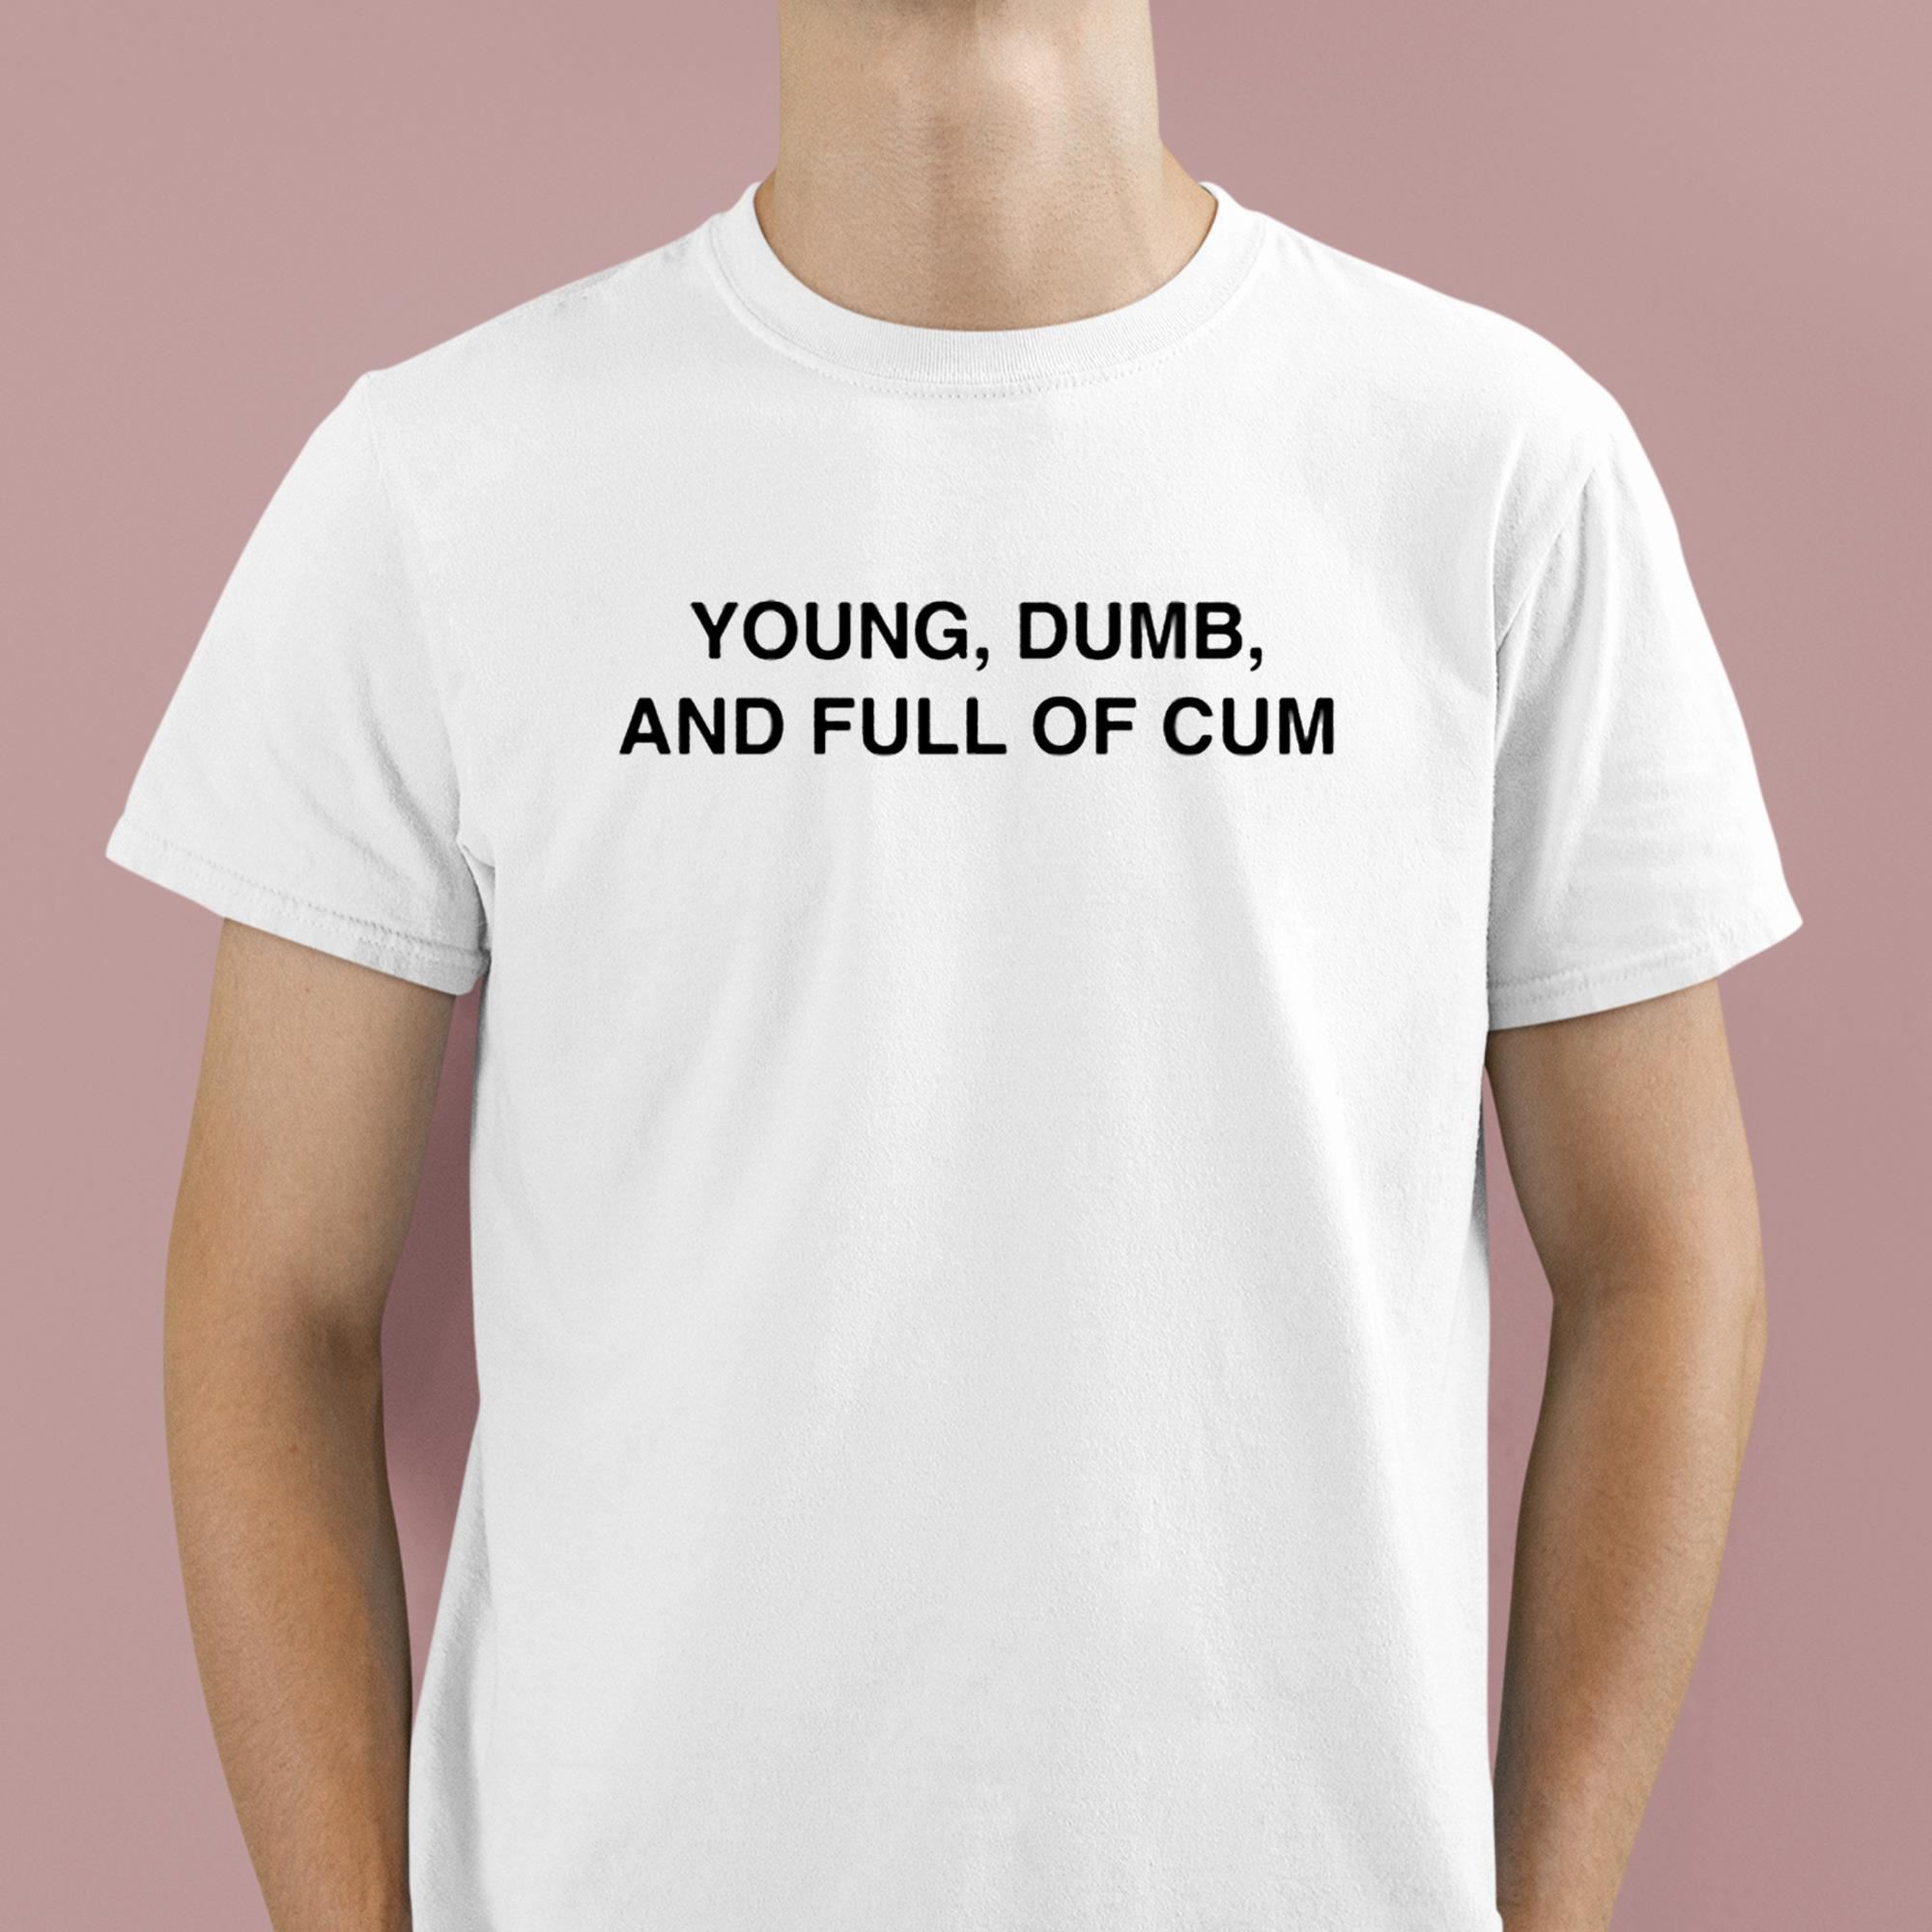 brett paradis recommends young dumb and full of cum pic